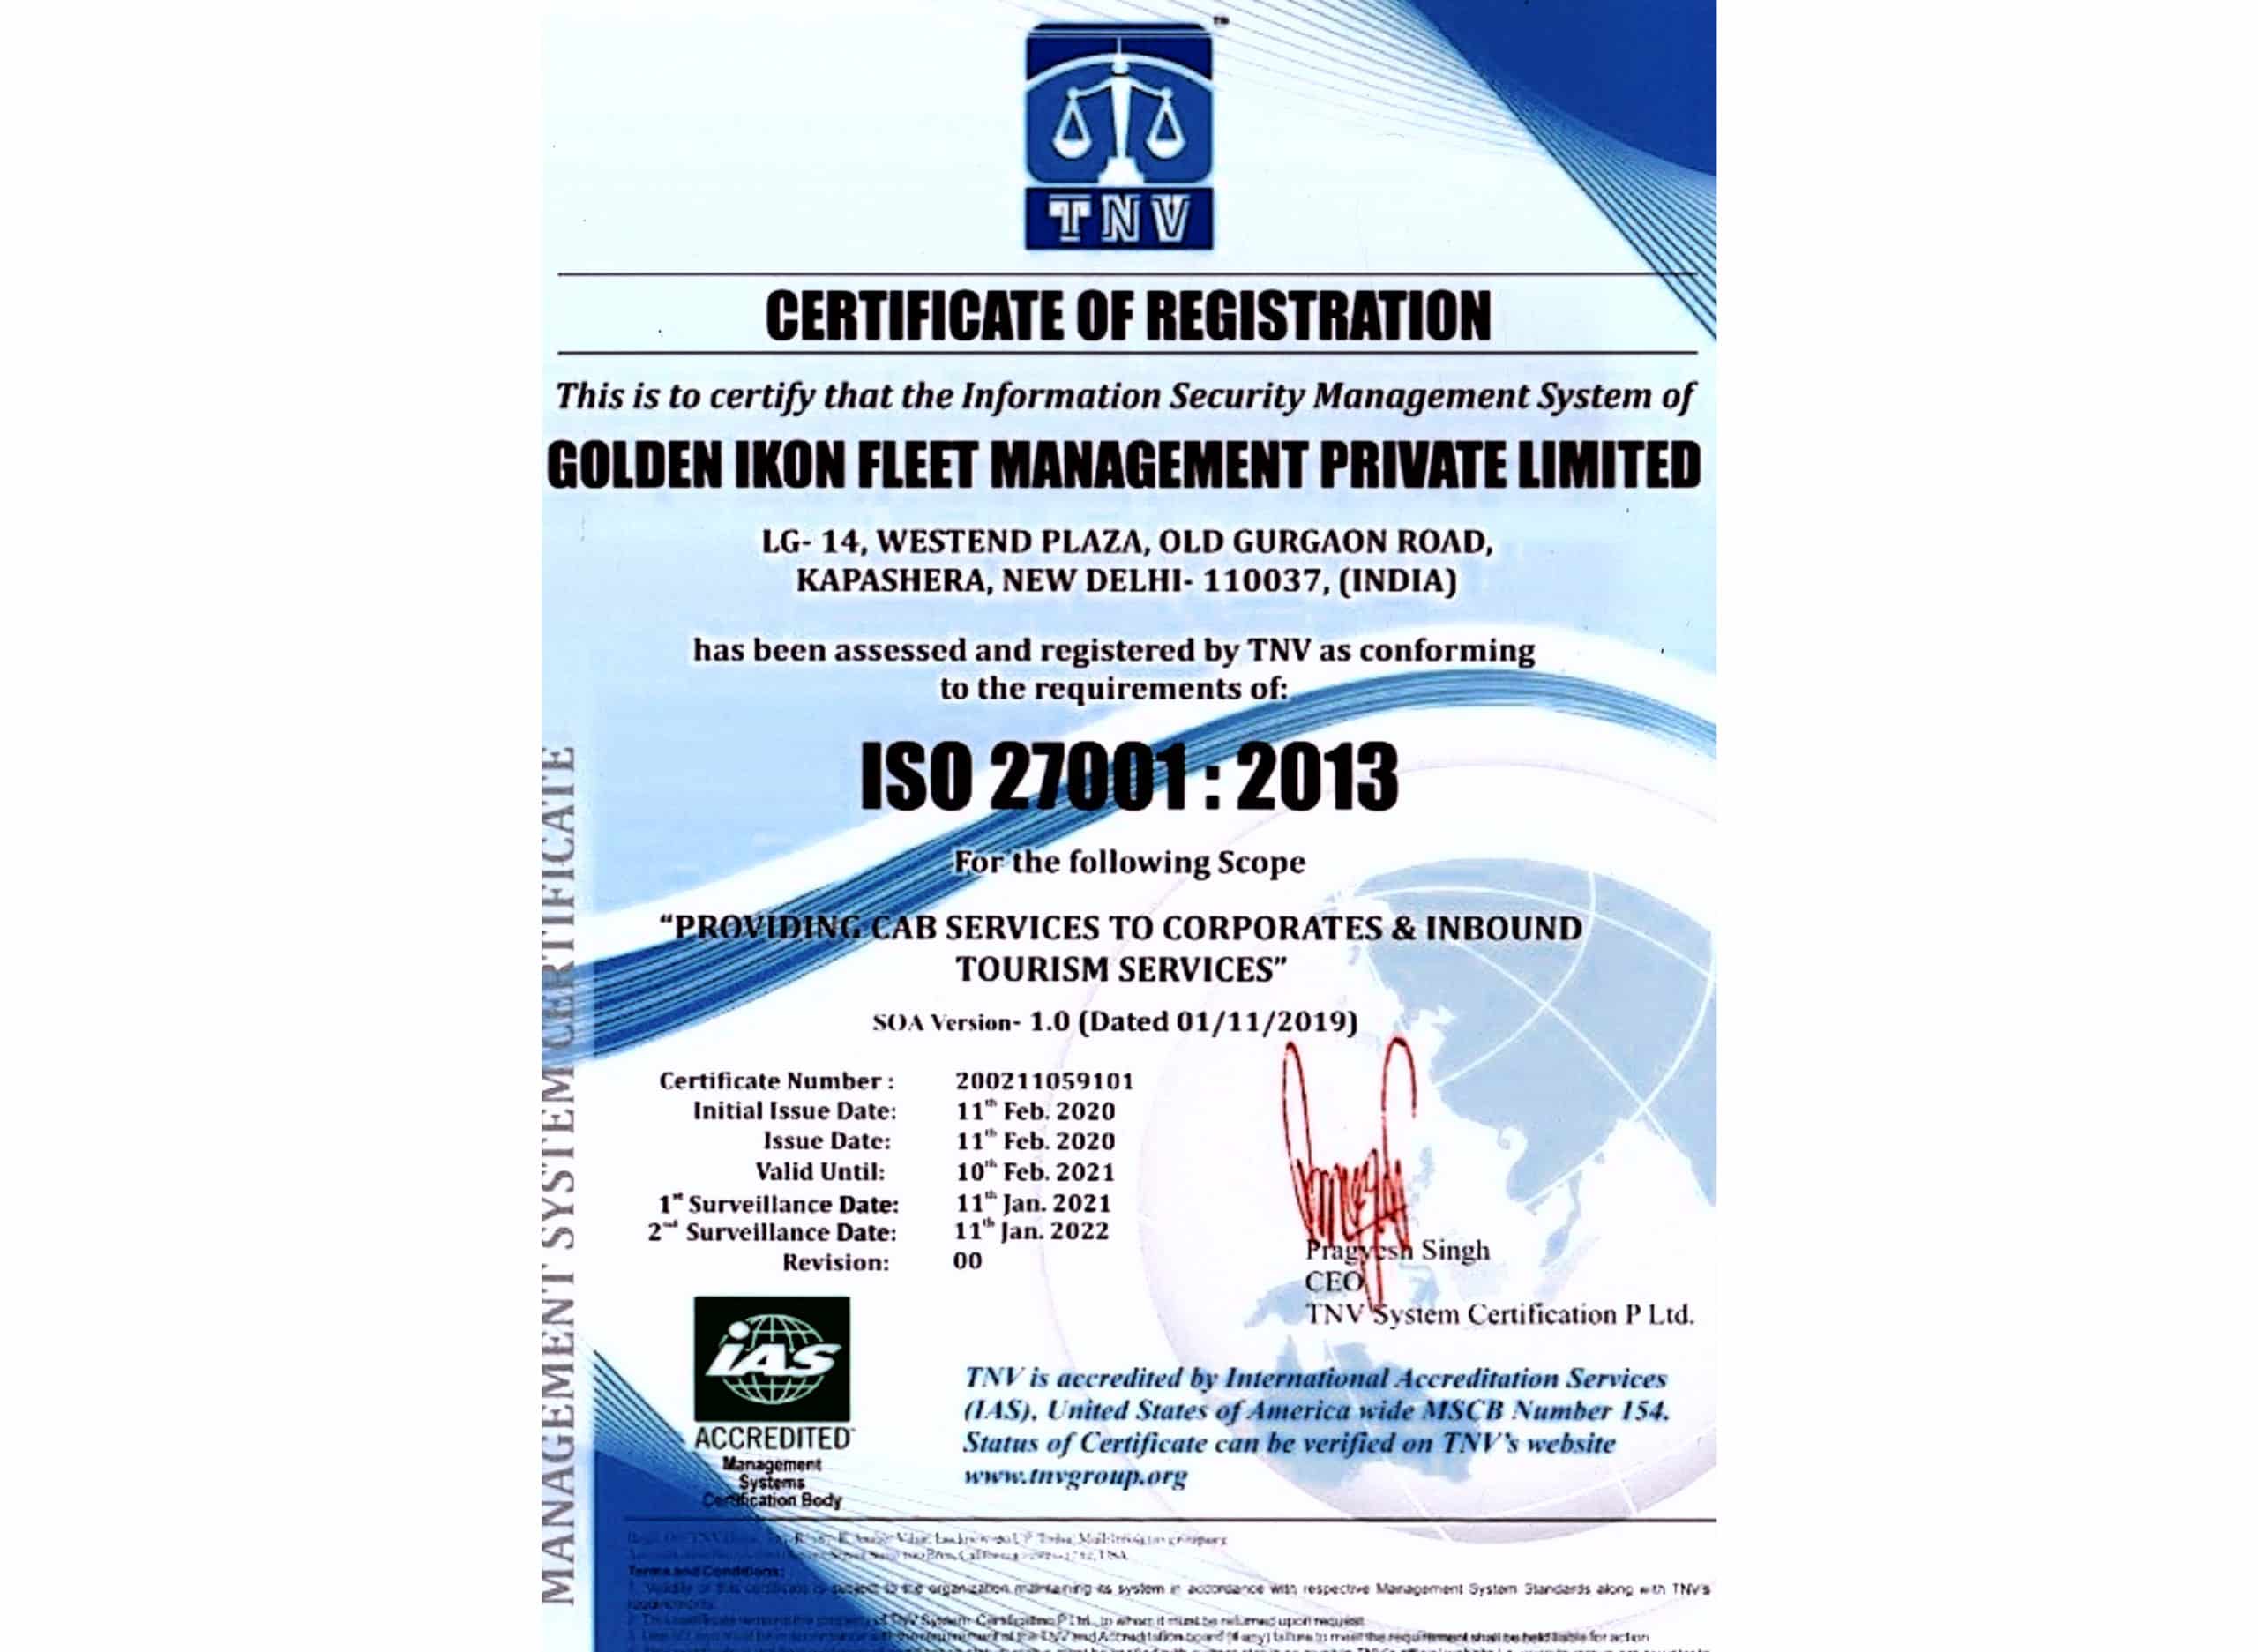 ISO Certificate (27001-2013)